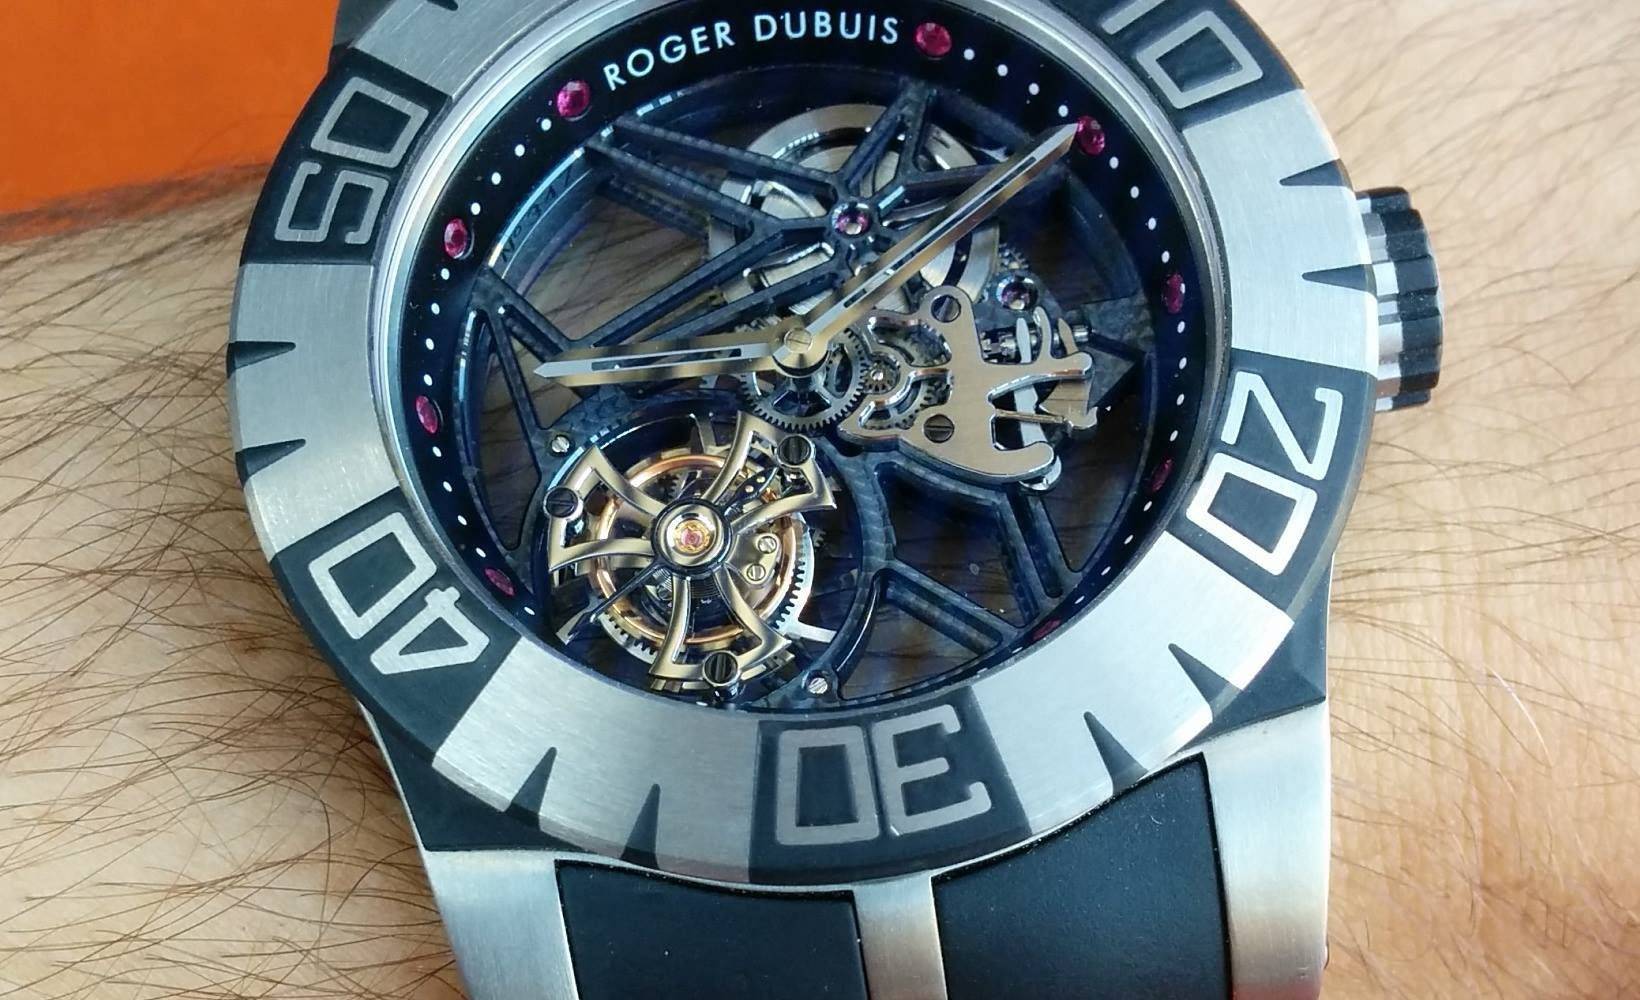 New feature: Candid Review Videos — first up Roger Dubuis Skeleton Tourbillon